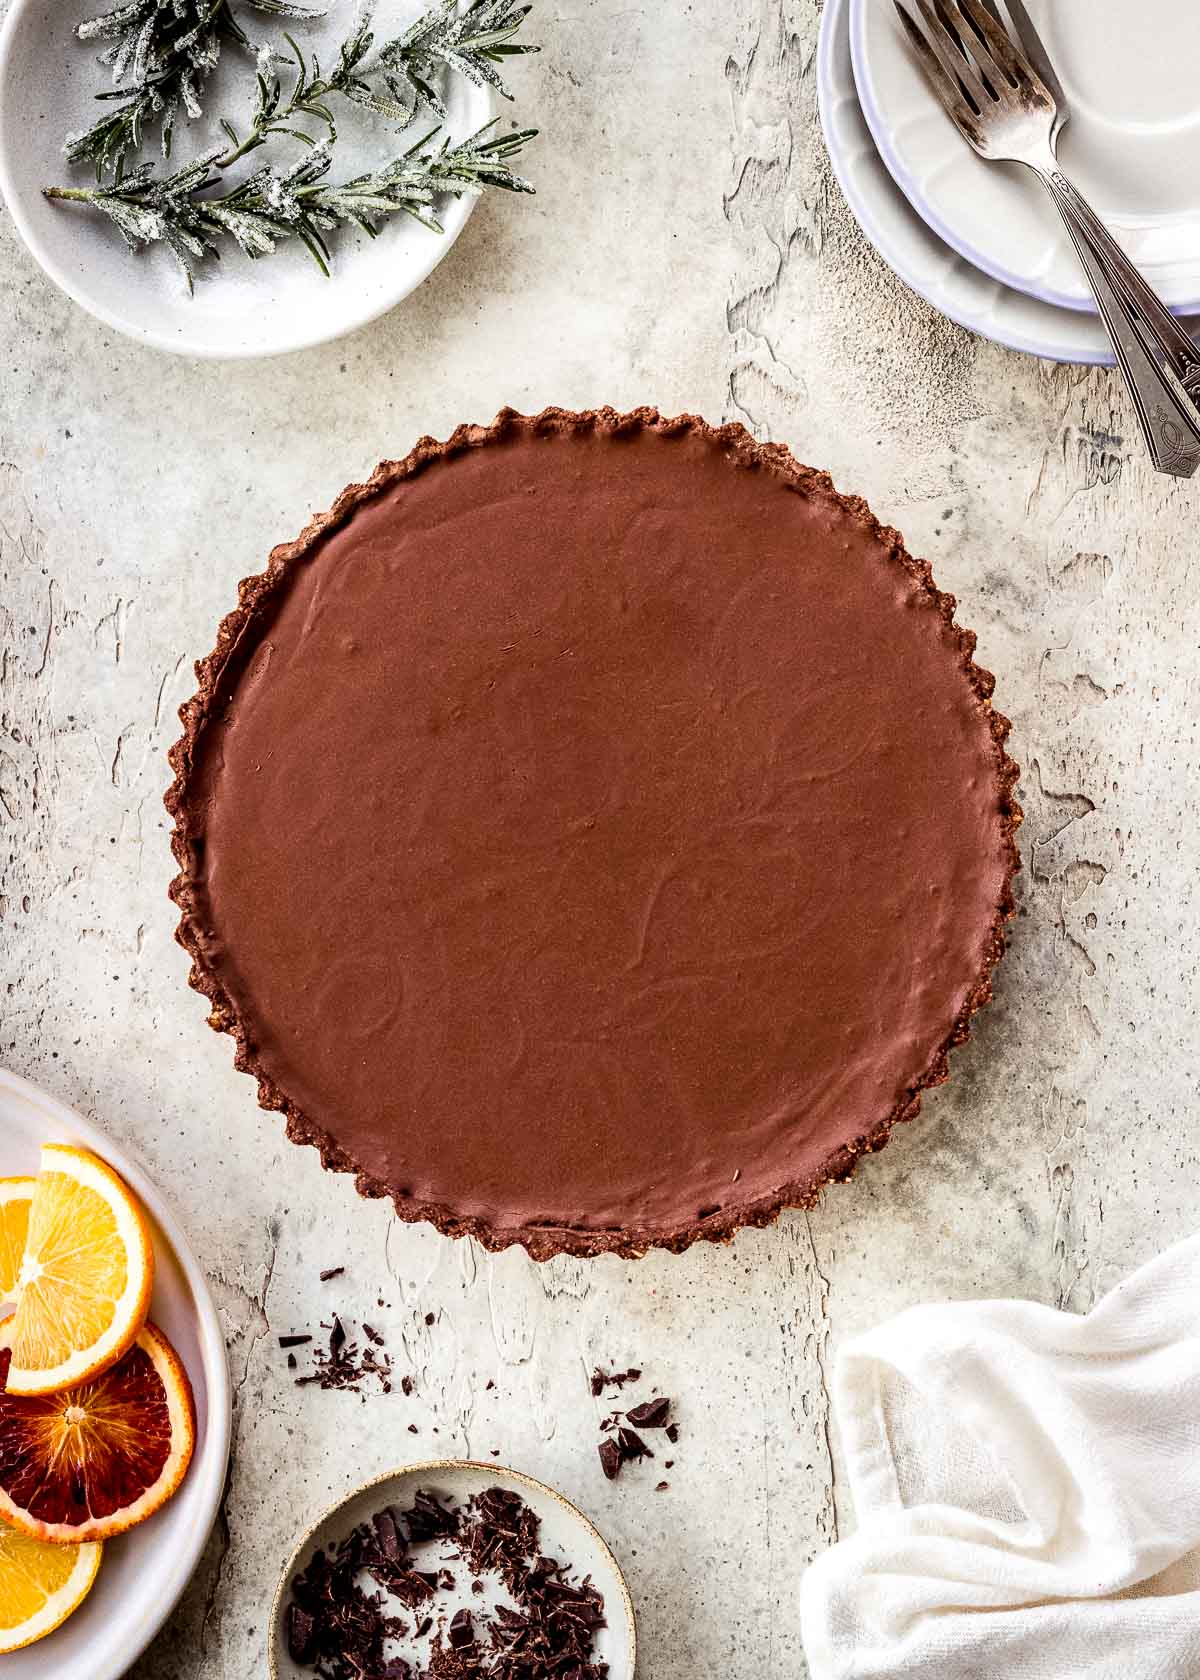 Plain chocolate ganache tart with chopped chocolate and rosemary sprigs nearby.